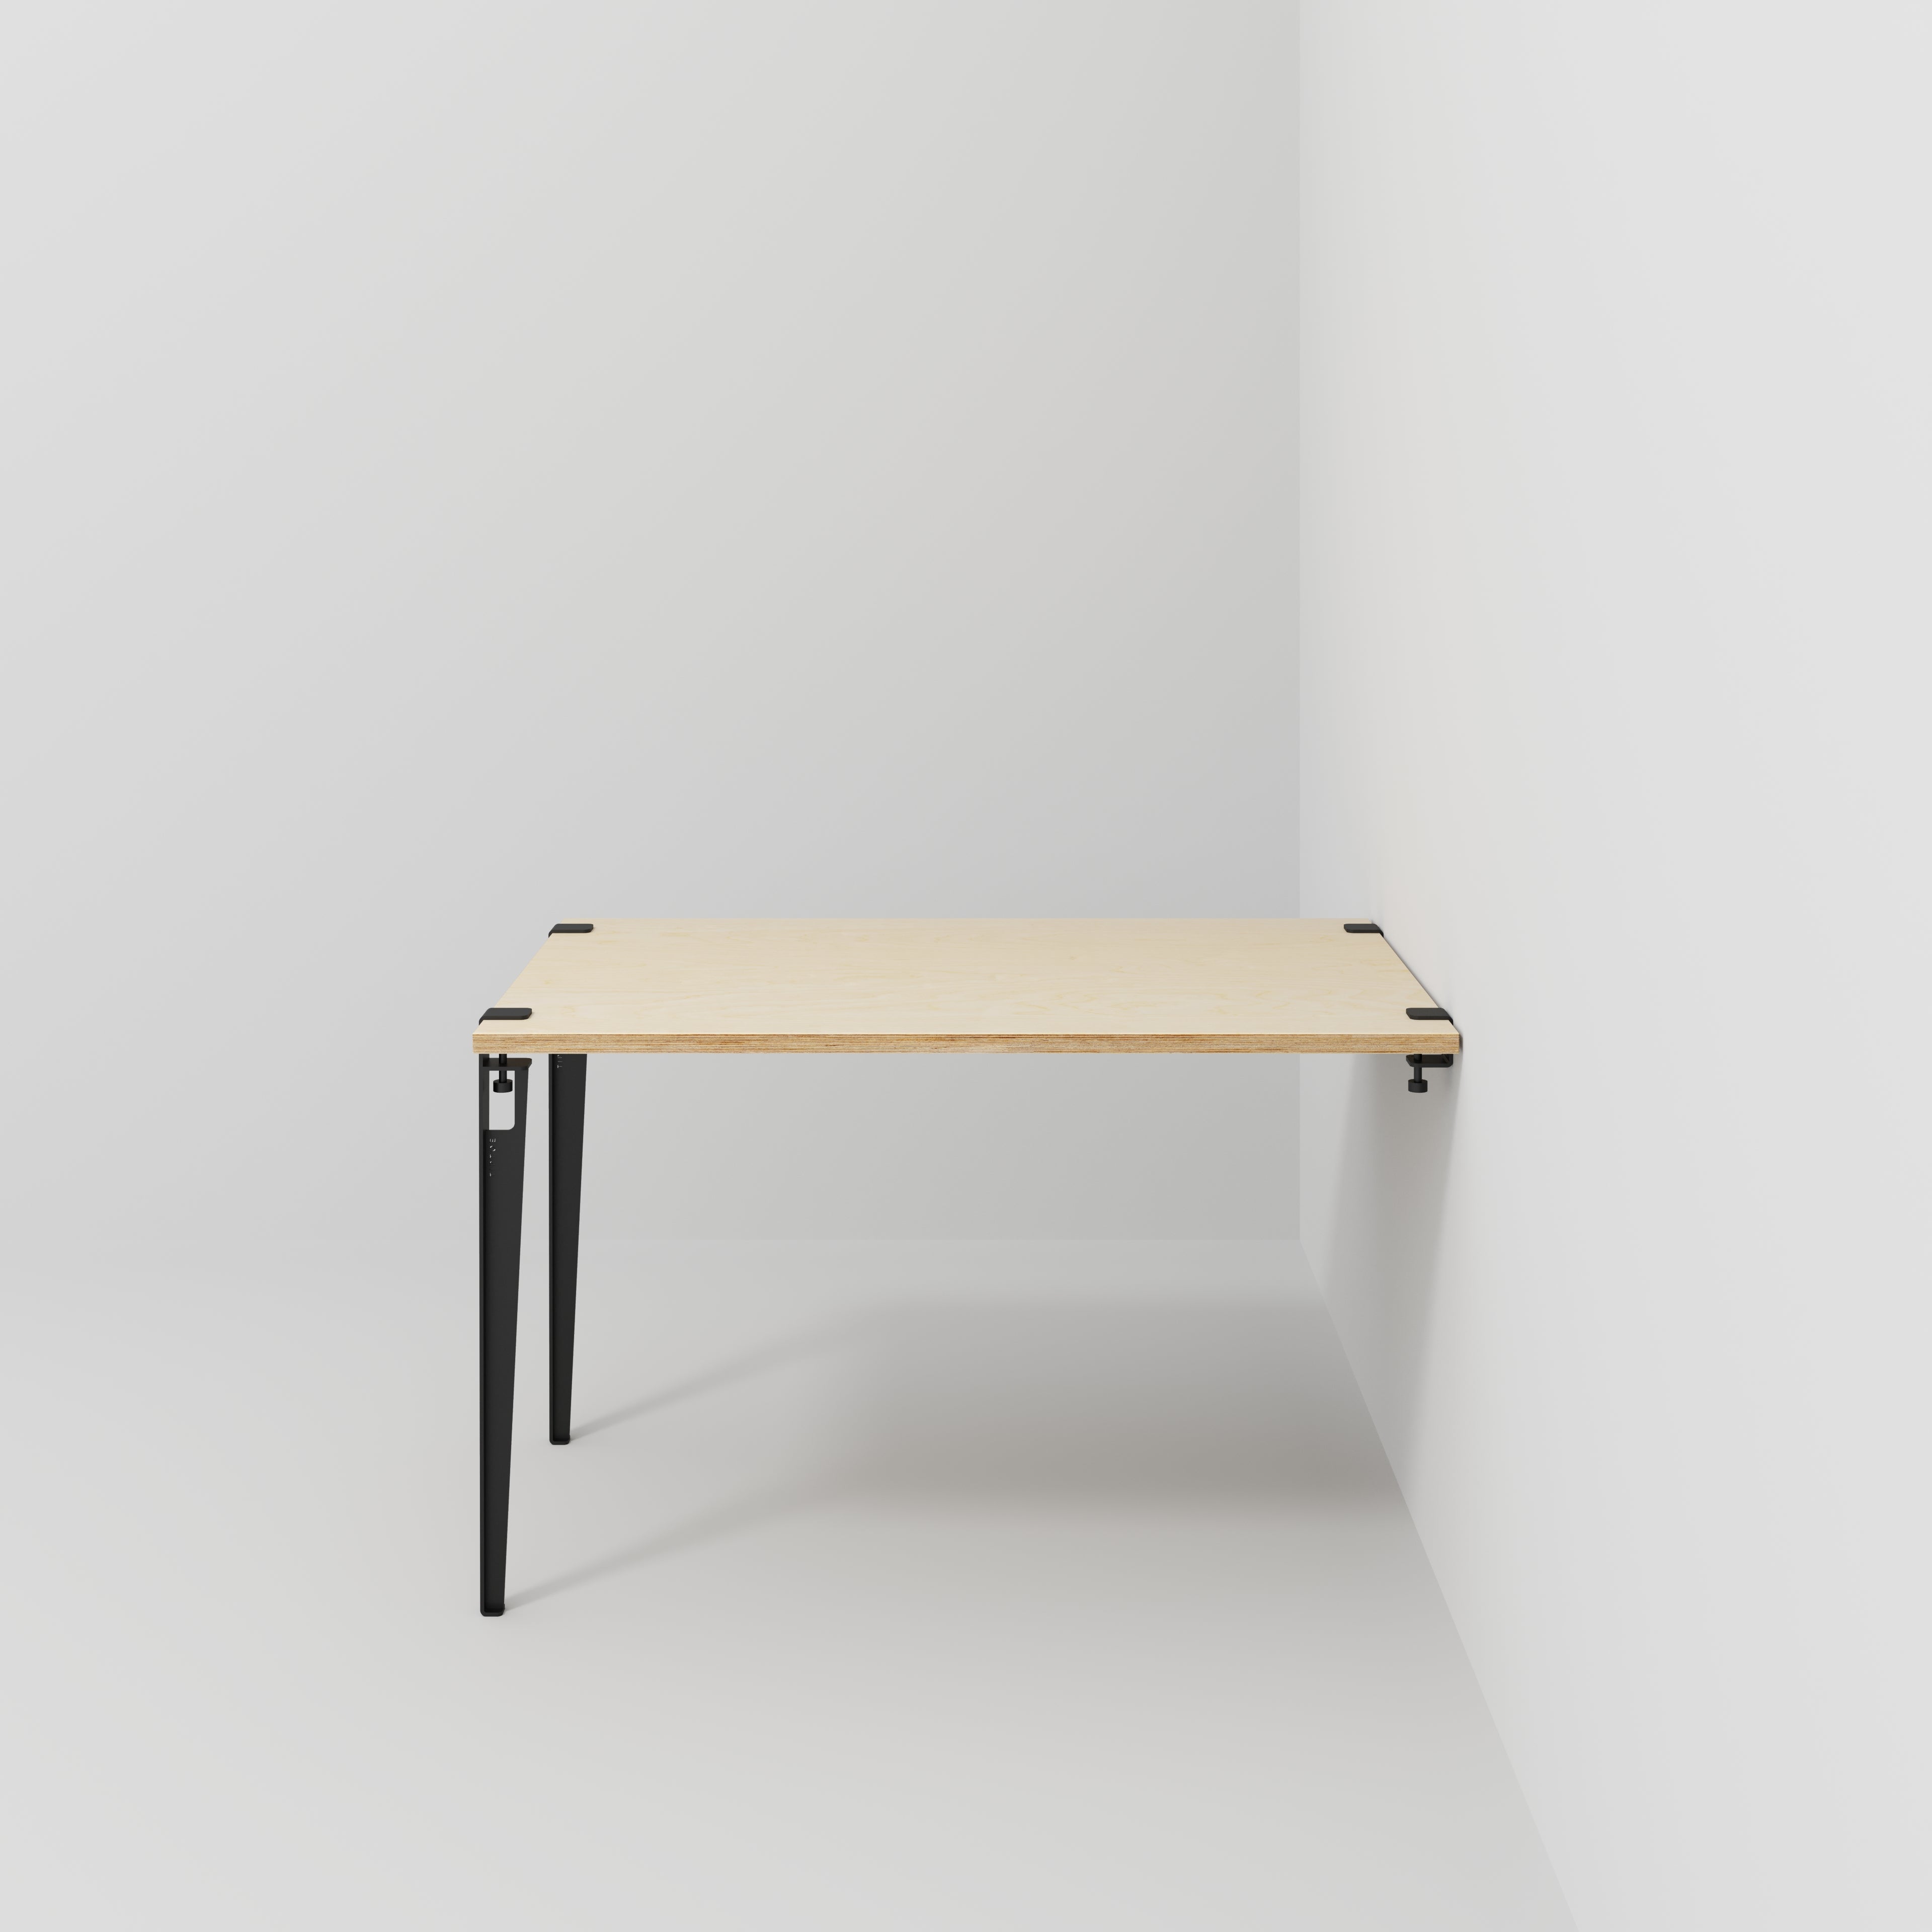 Wall Table with Black Tiptoe Legs and Brackets - Plywood Birch - 1200(w) x 800(d) x 900(h)